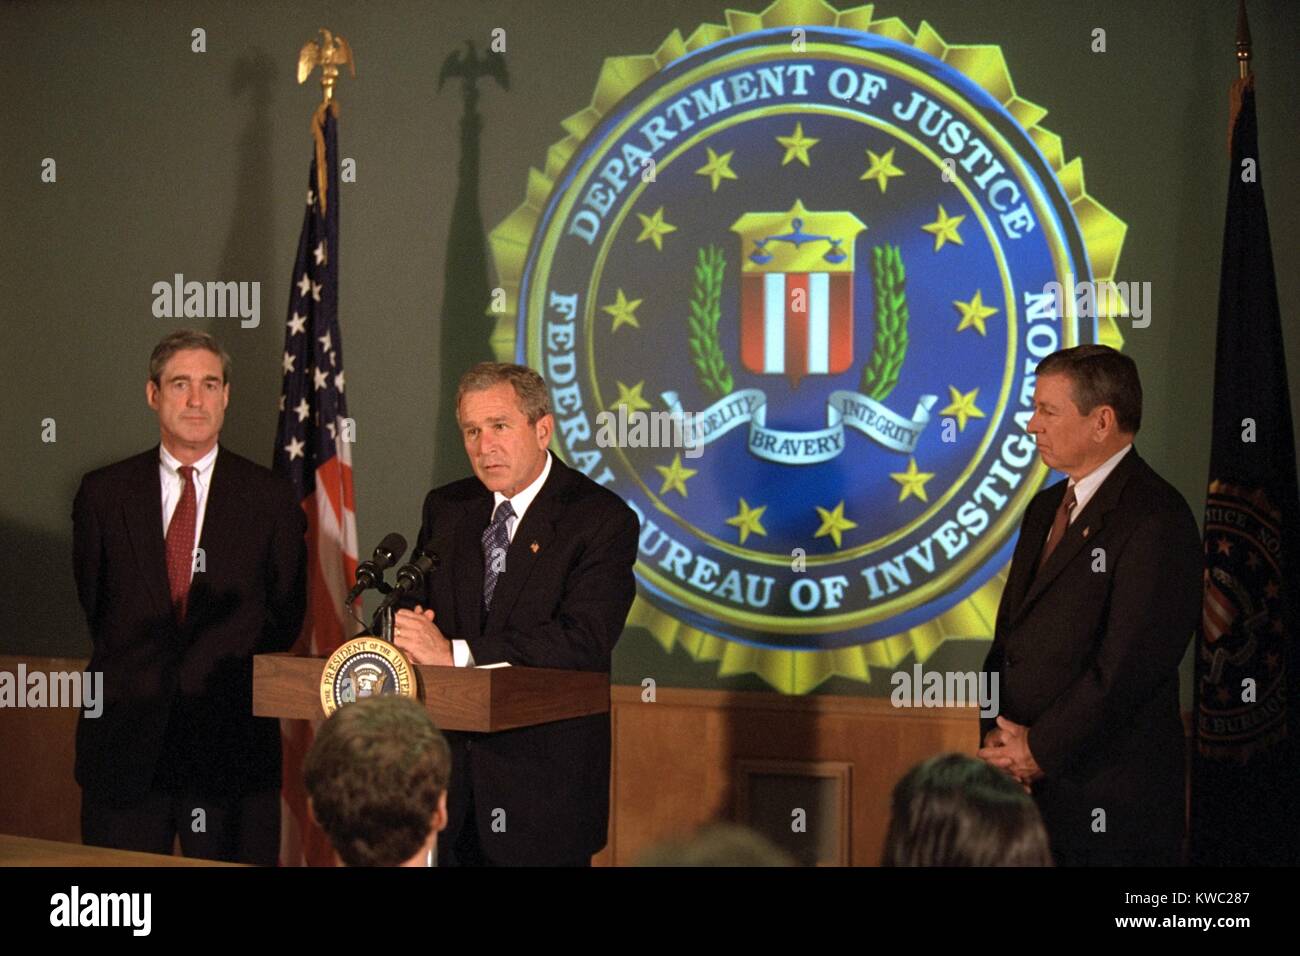 President George W. Bush at FBI Headquarters, Sept. 25, 2001. He is flanked by Director Robert Mueller, left, and U.S. Attorney General John Ashcroft. (BSLOC 2015 2 168) Stock Photo